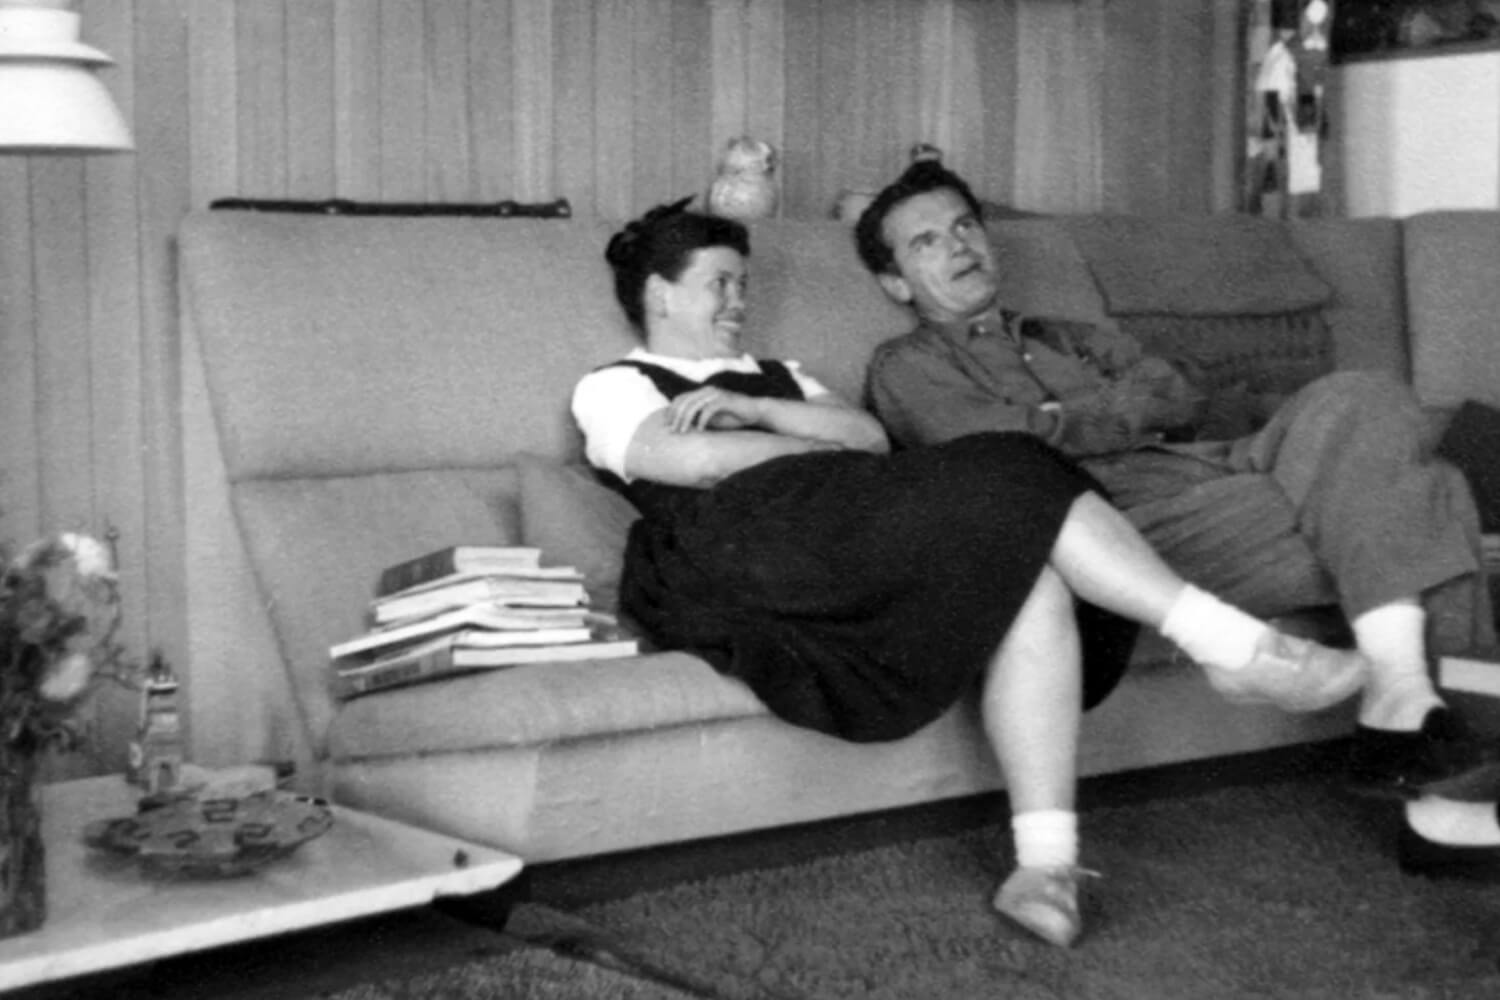 Charles Eames and his wife, Ray Eames, are sitting in their home.